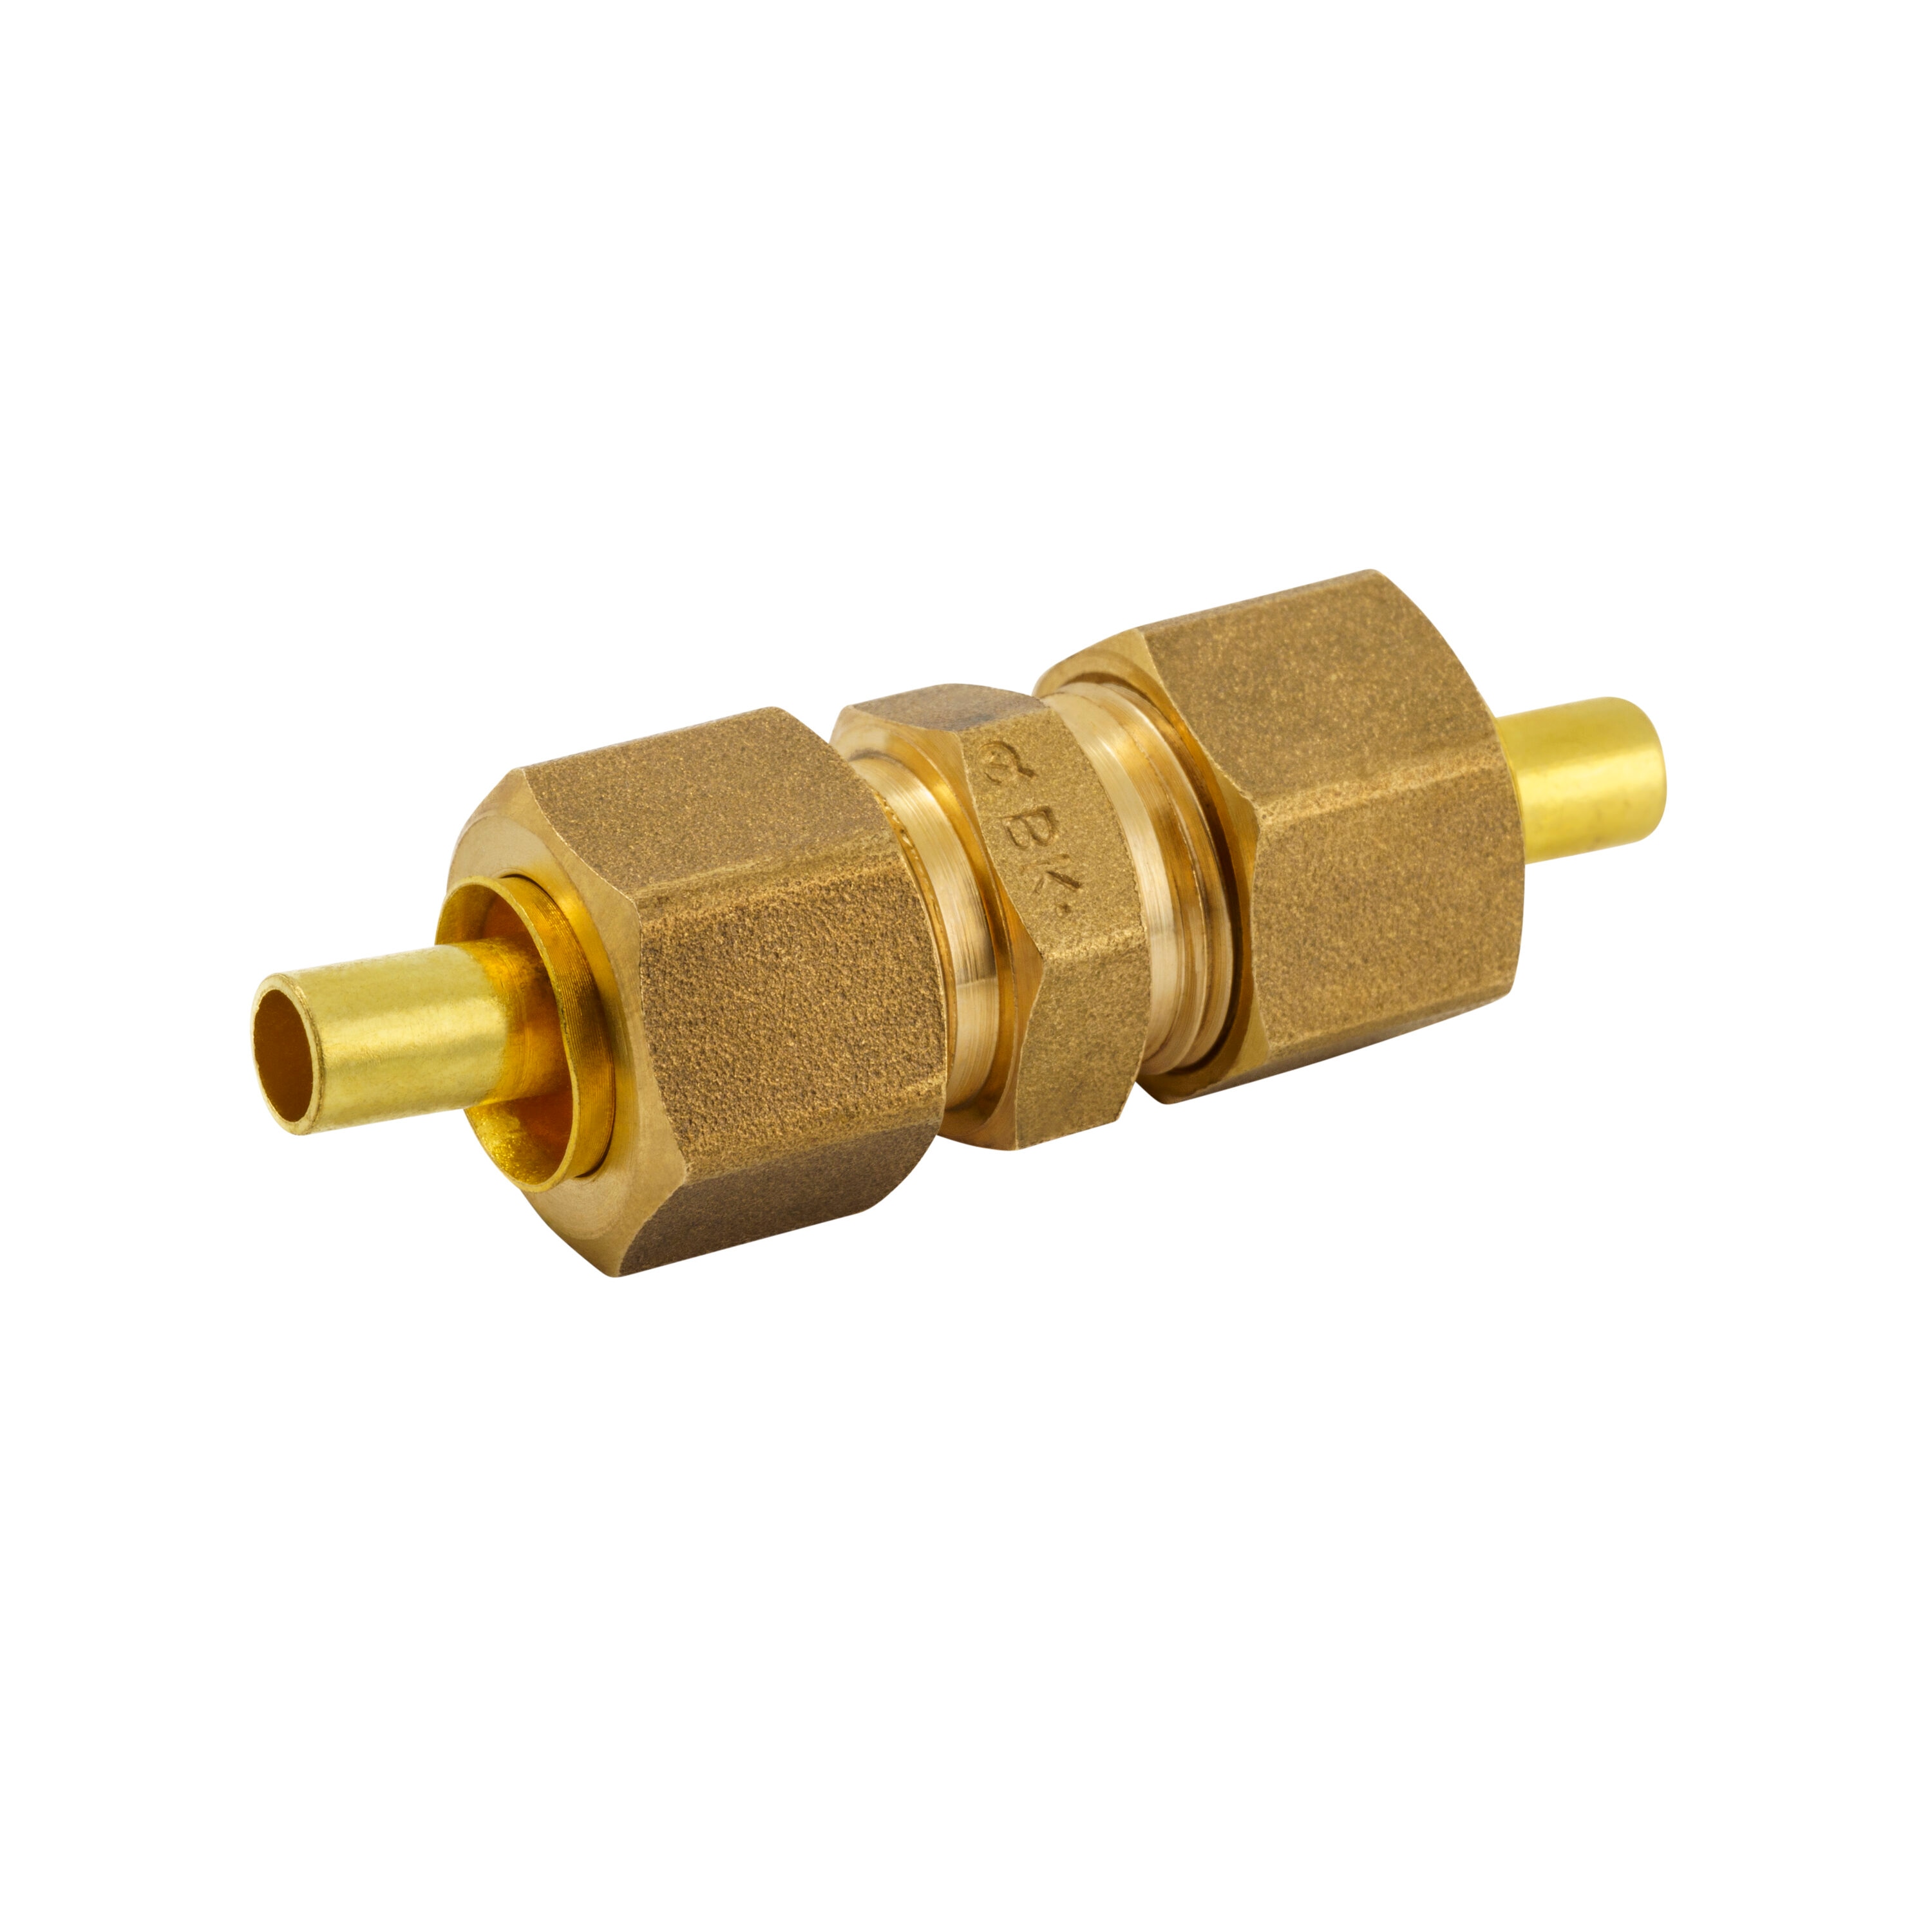 Union Brass Fittings at